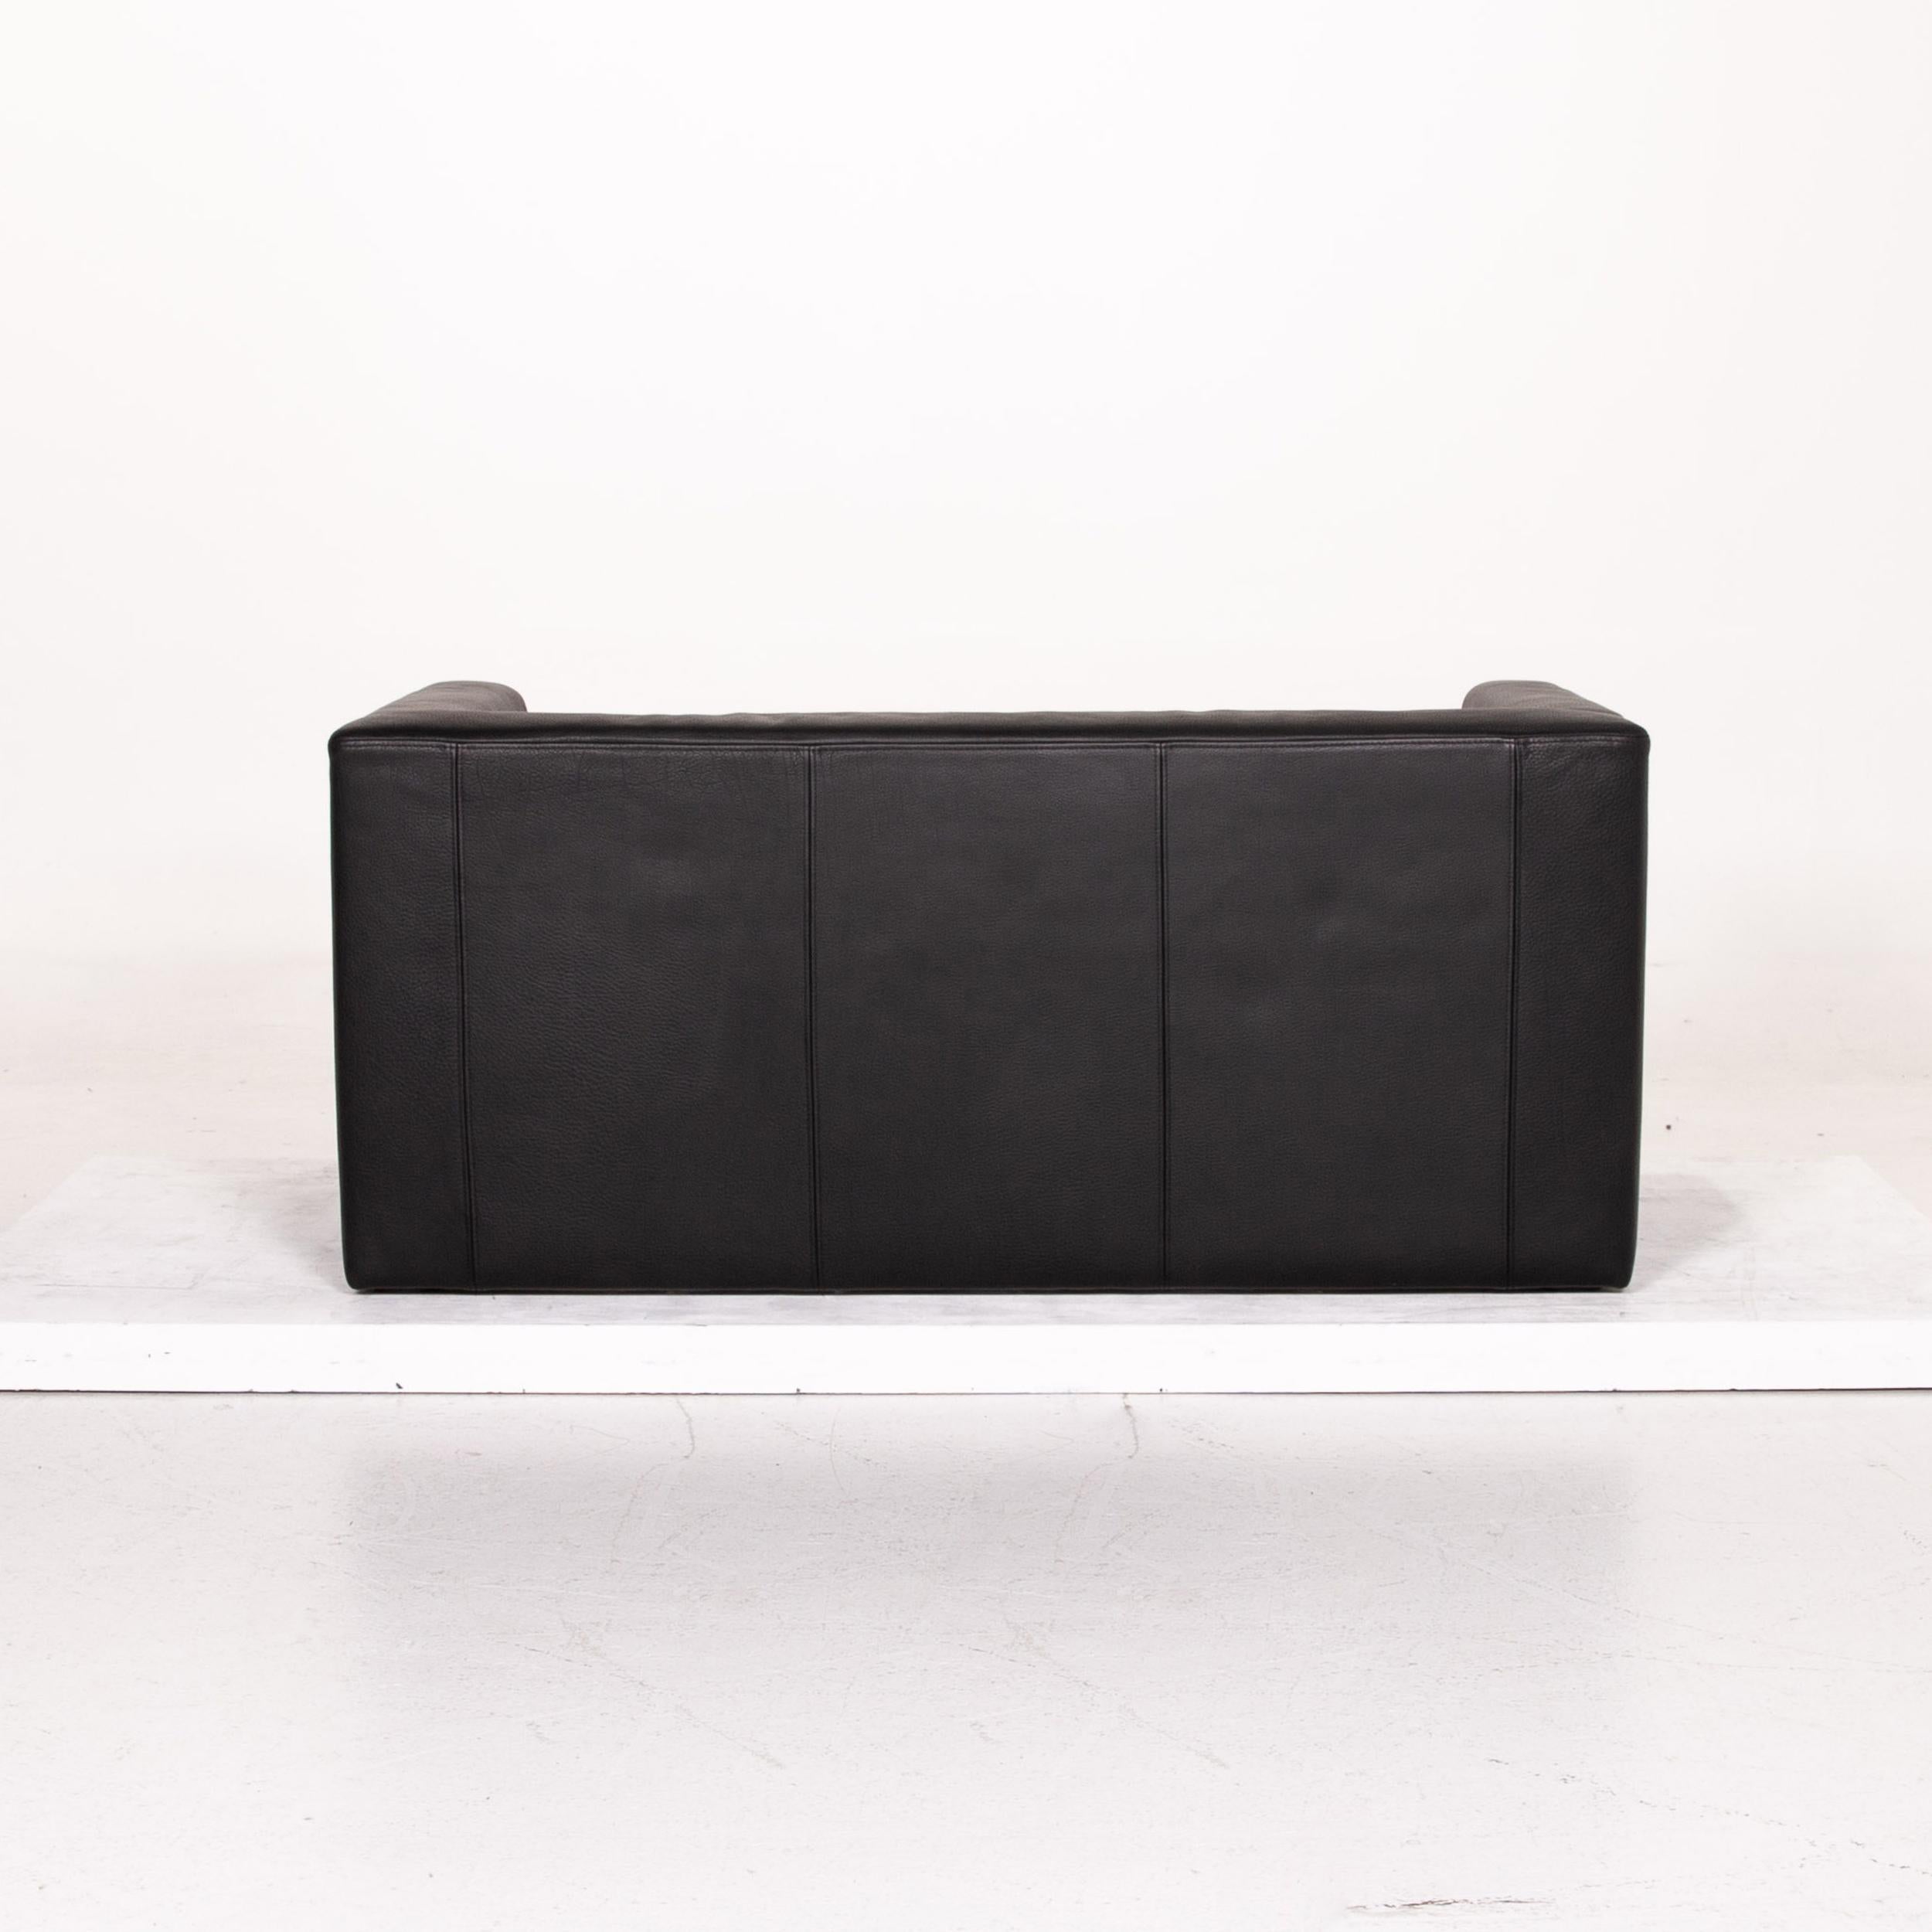 Brühl & Sippold Visavis Leather Sofa Black Two-Seat Couch For Sale 3